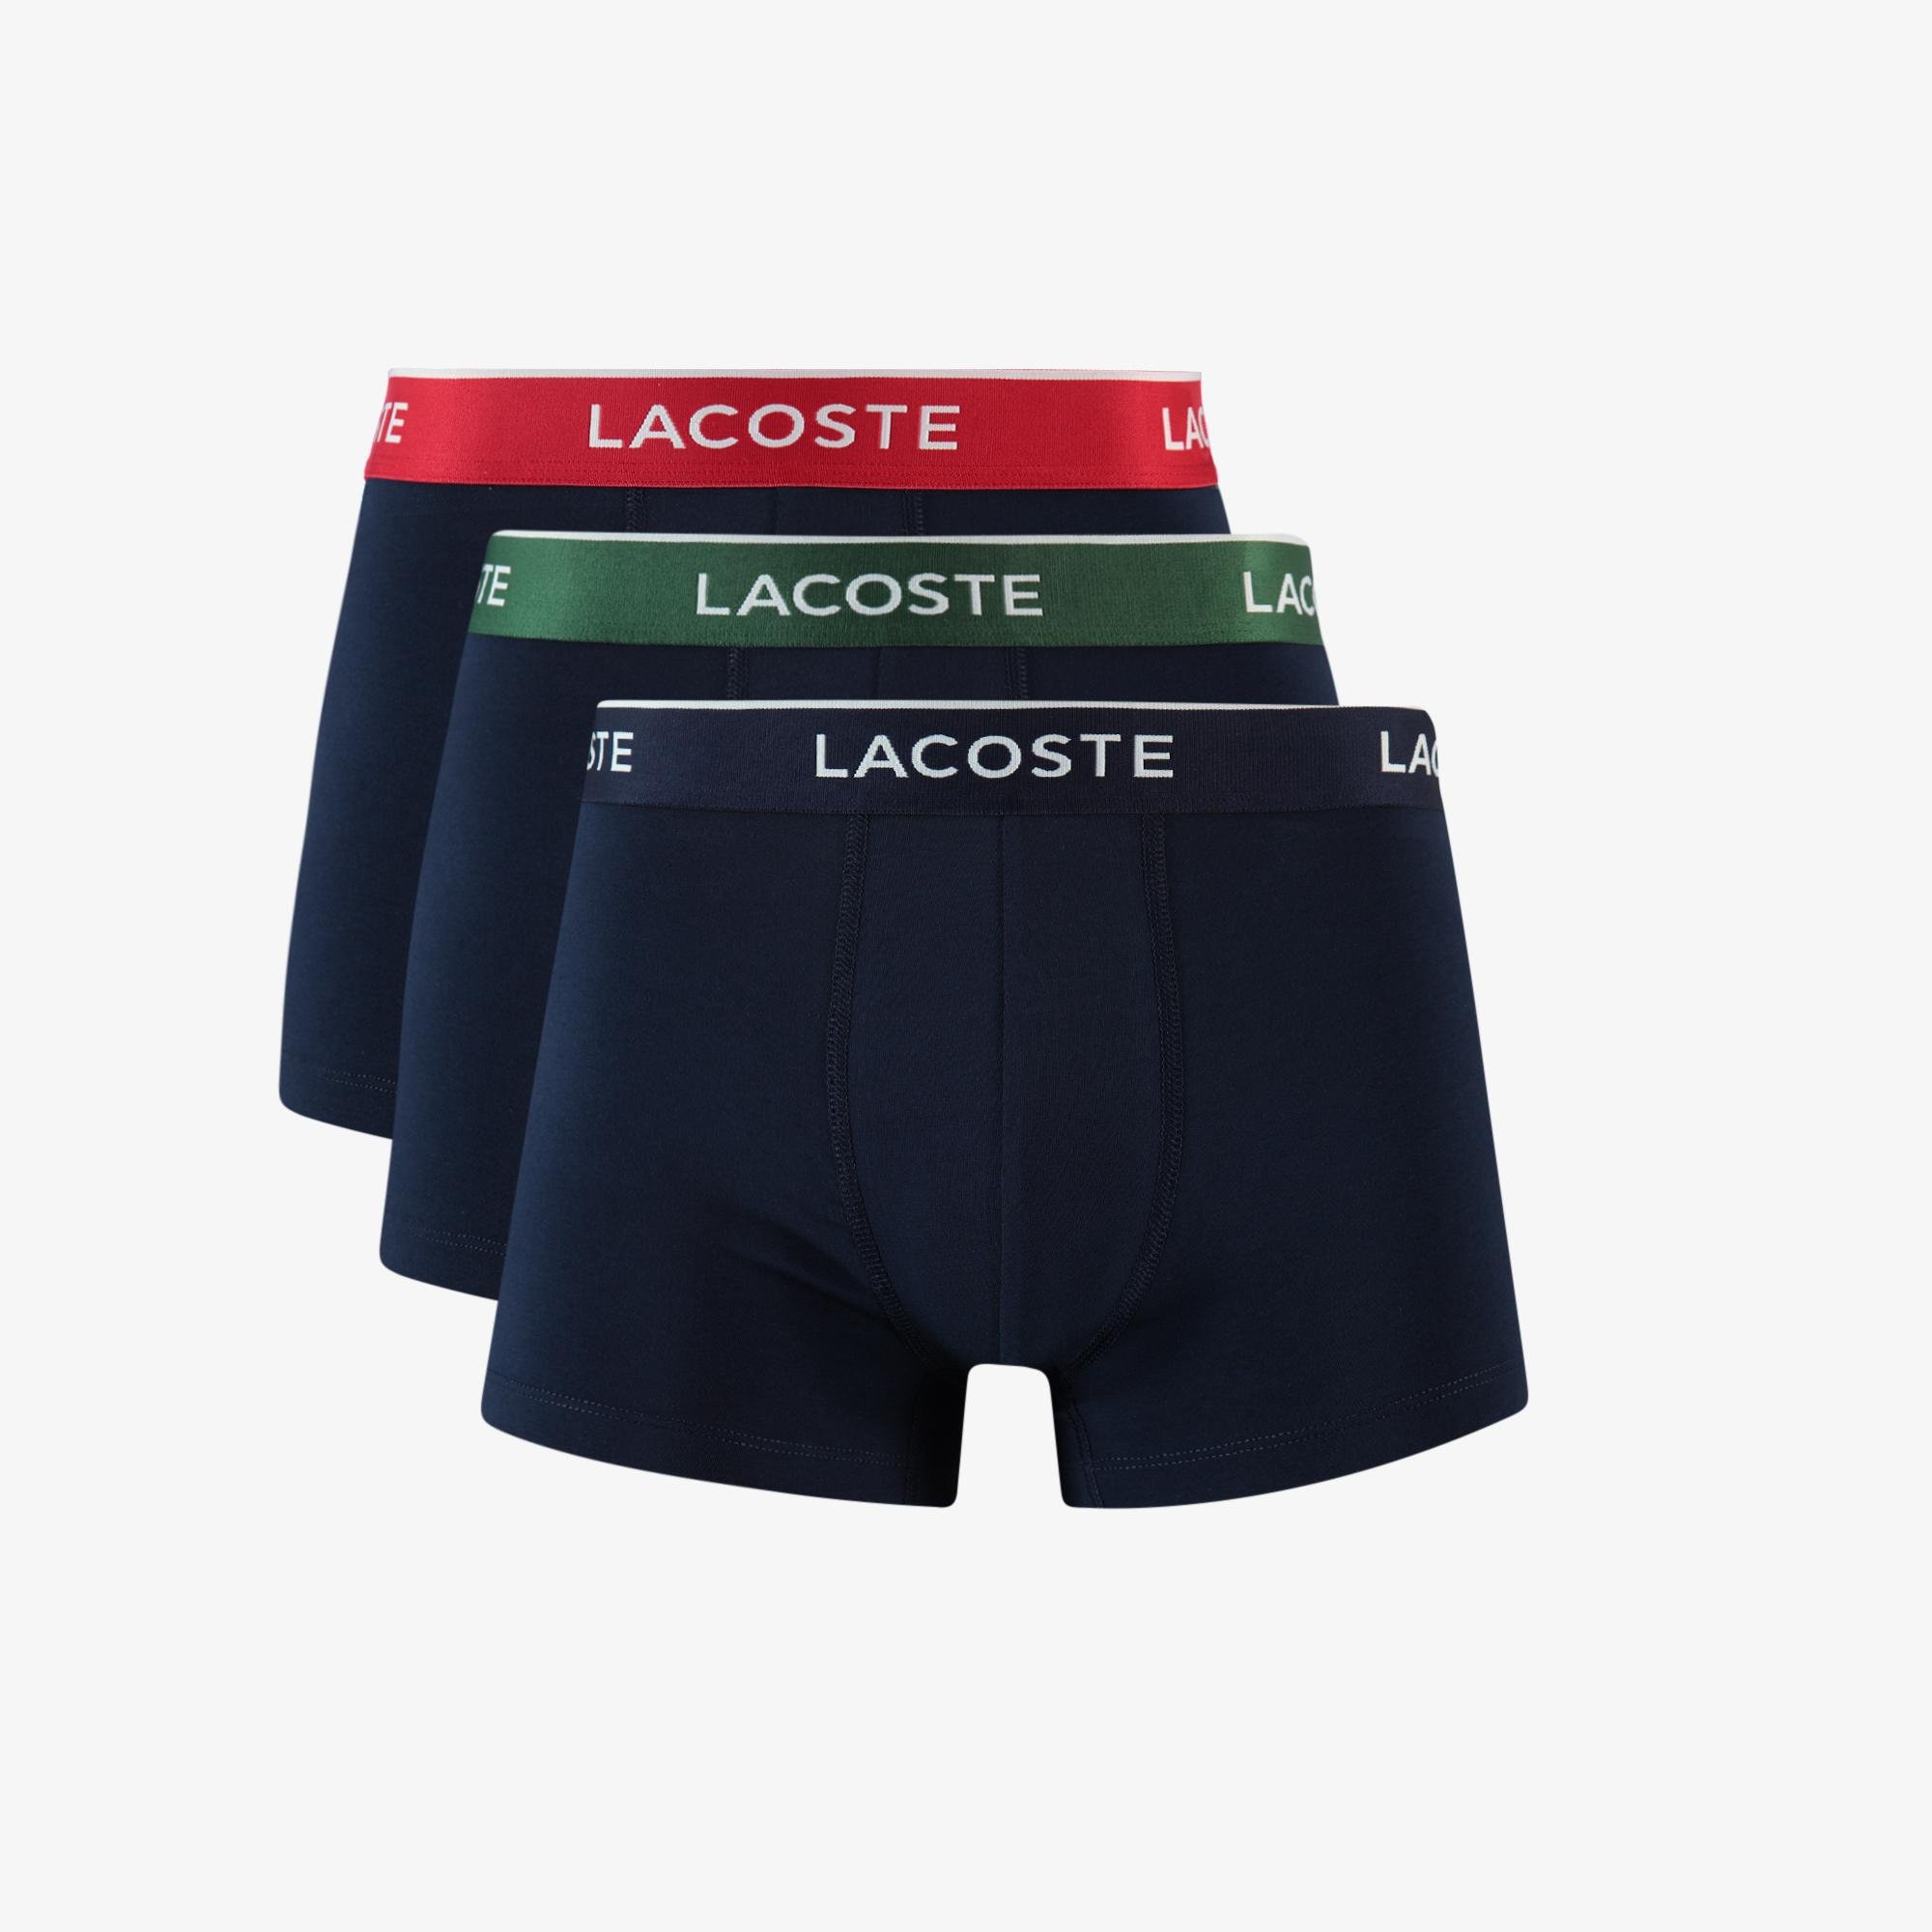 Lacoste, 3 Pack Boxer Shorts, Trunks